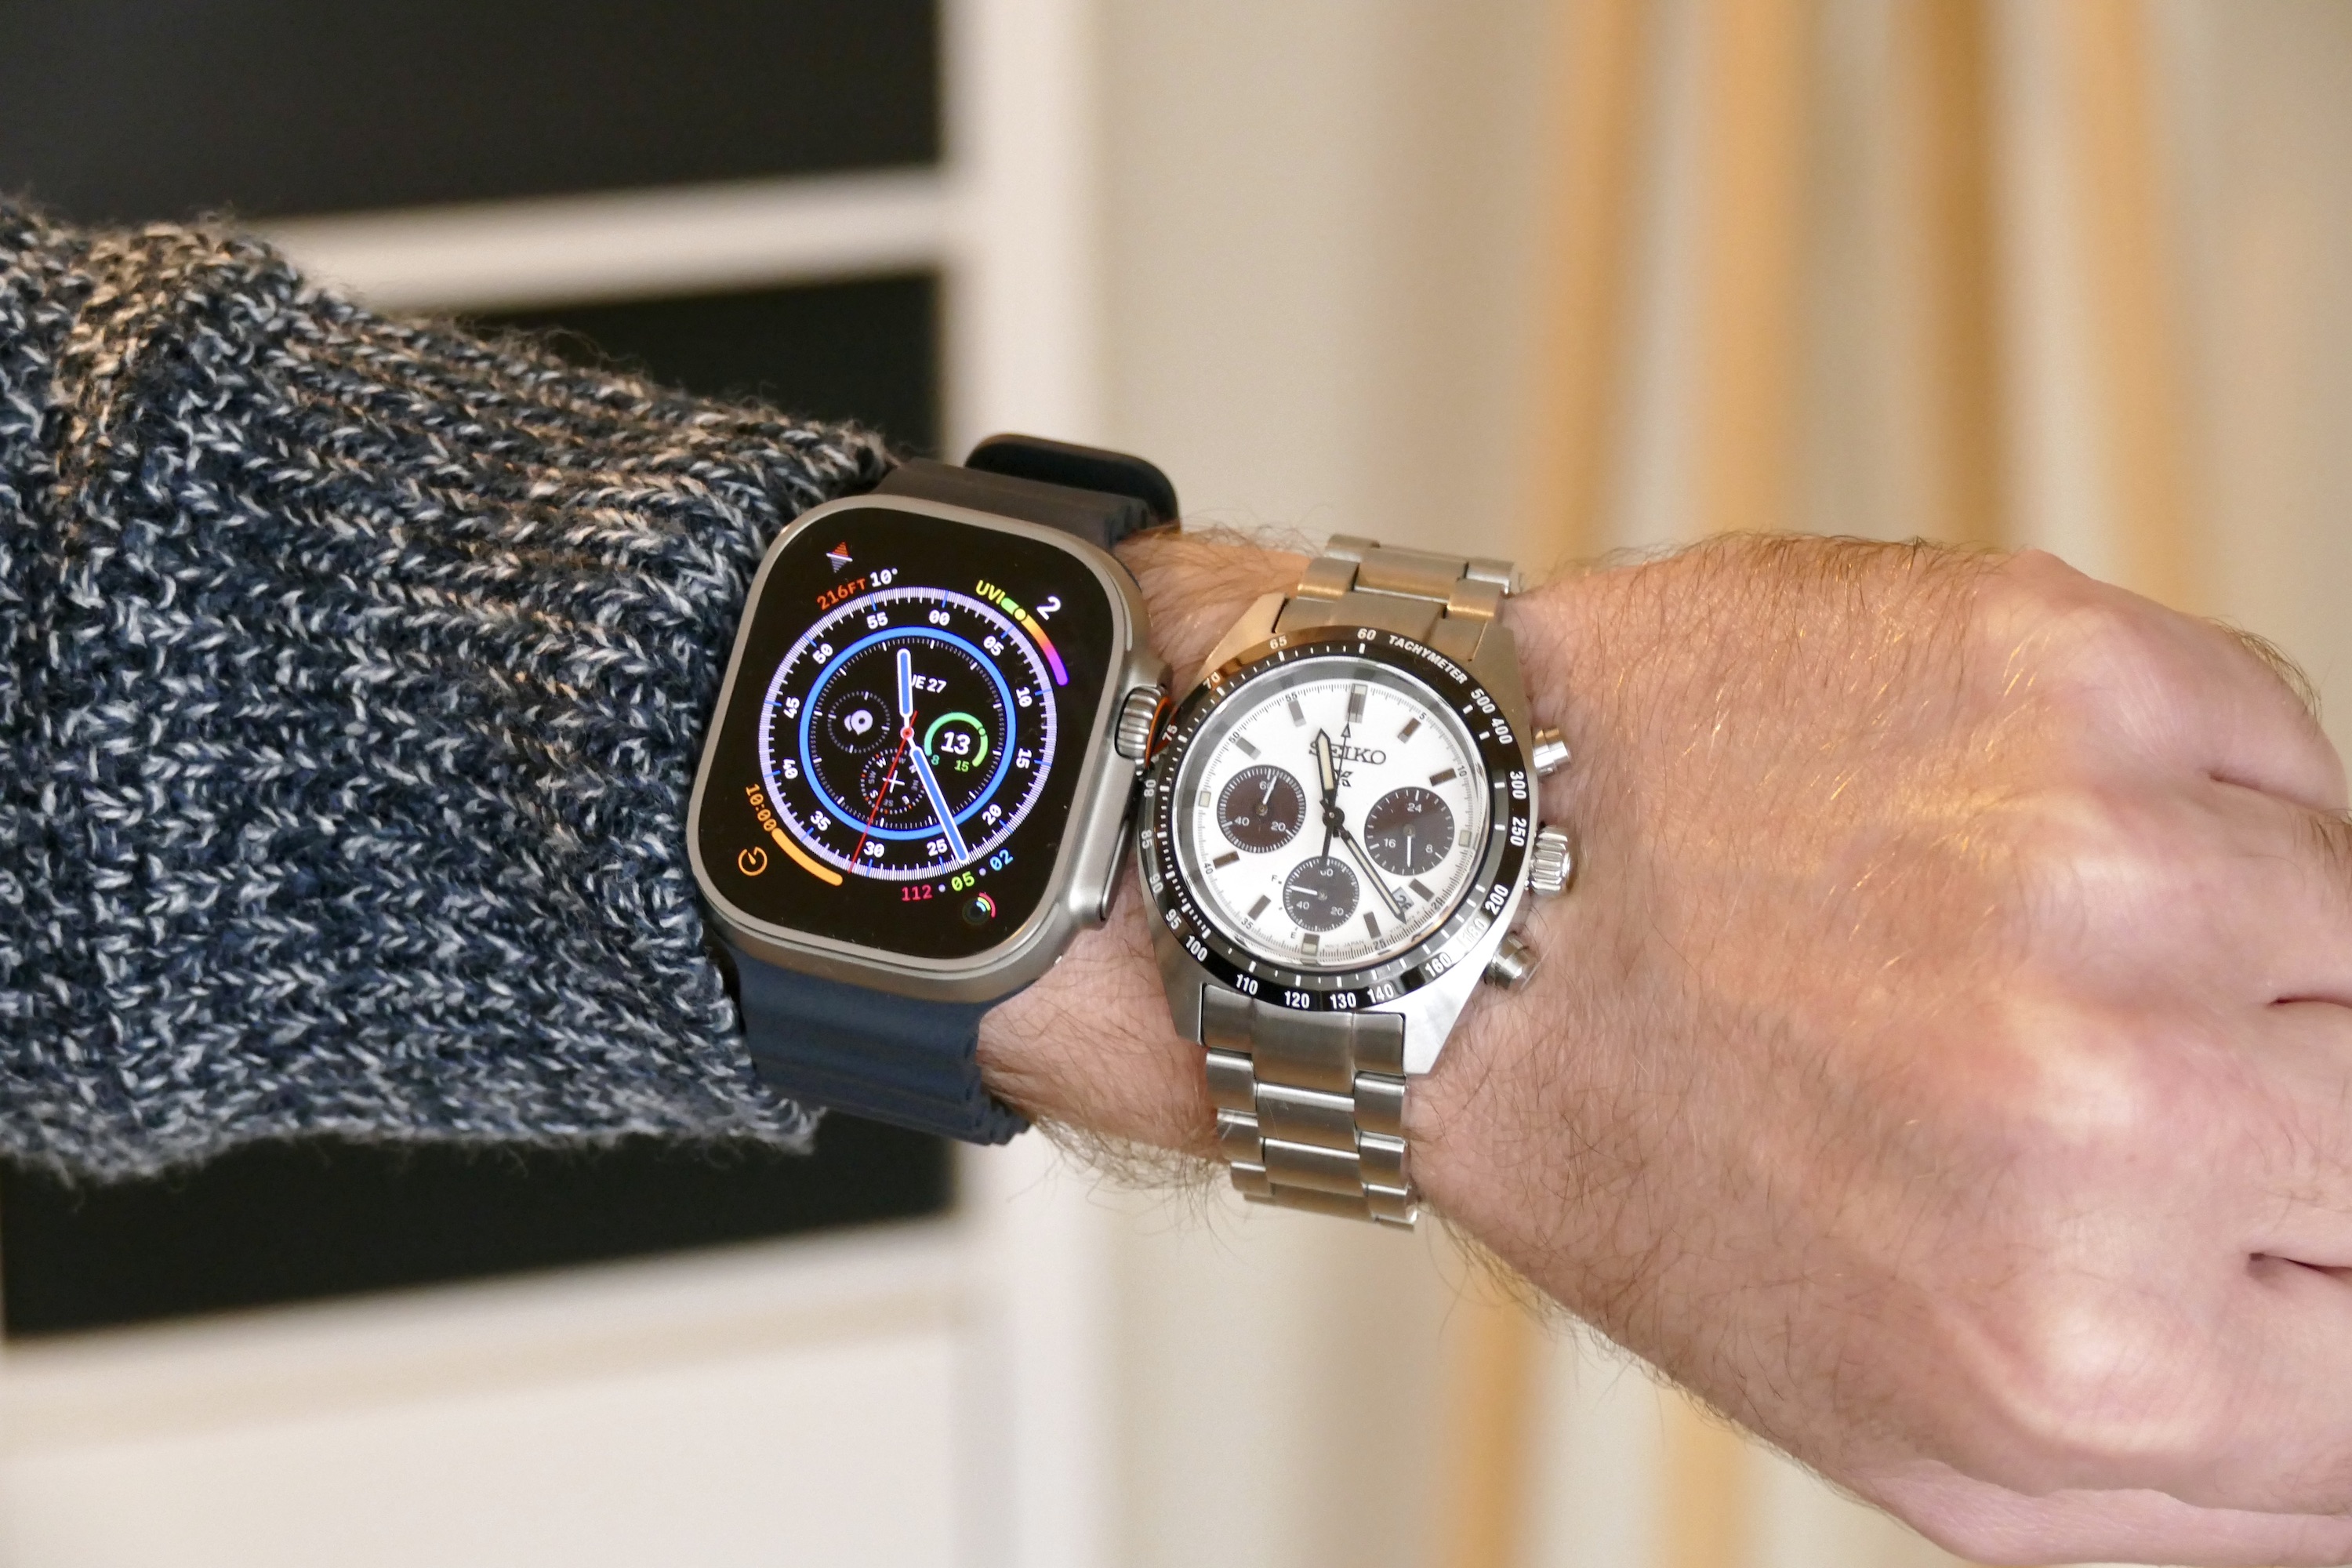 The Apple Watch Ultra and the Seiko Speedtimer watch.